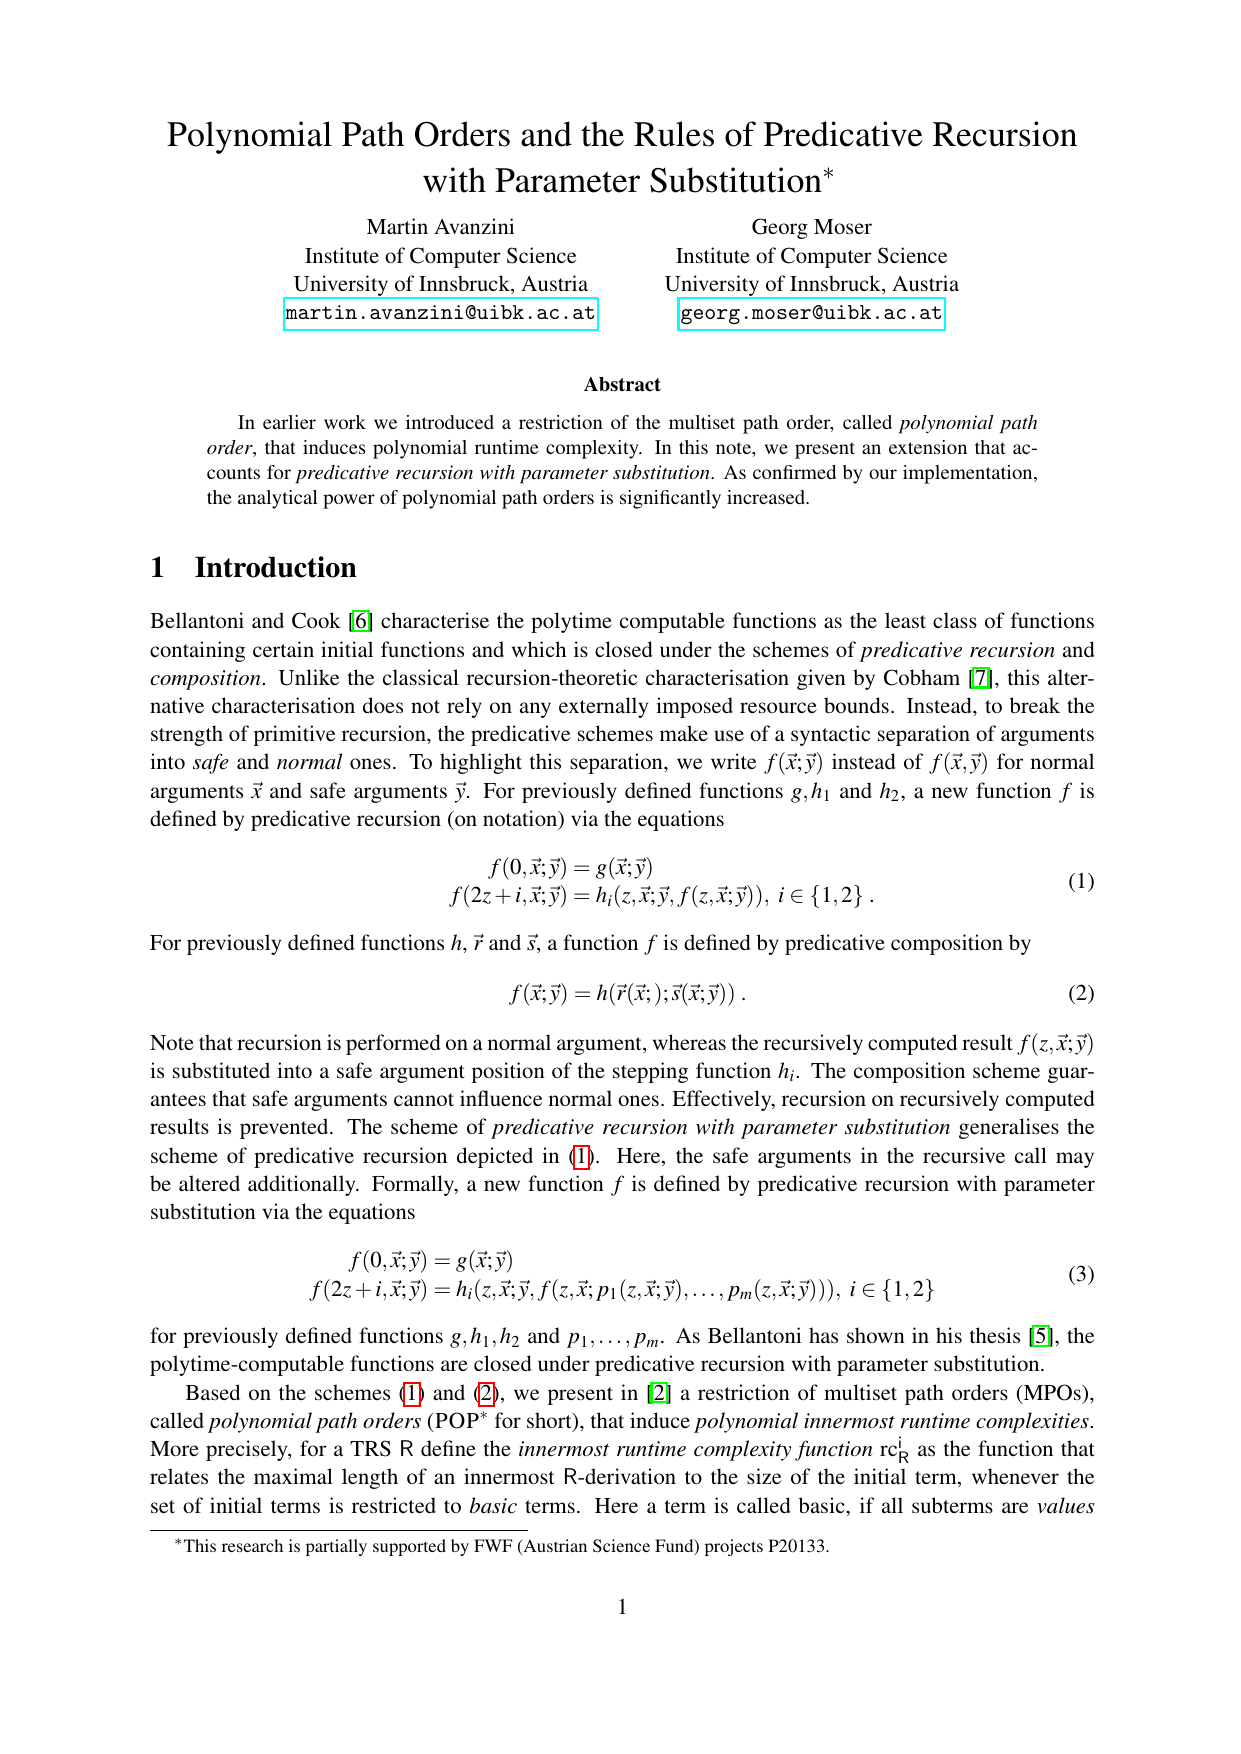 Polynomial Path Orders and the Rules of Predicative Recursion with Parameter Substitution